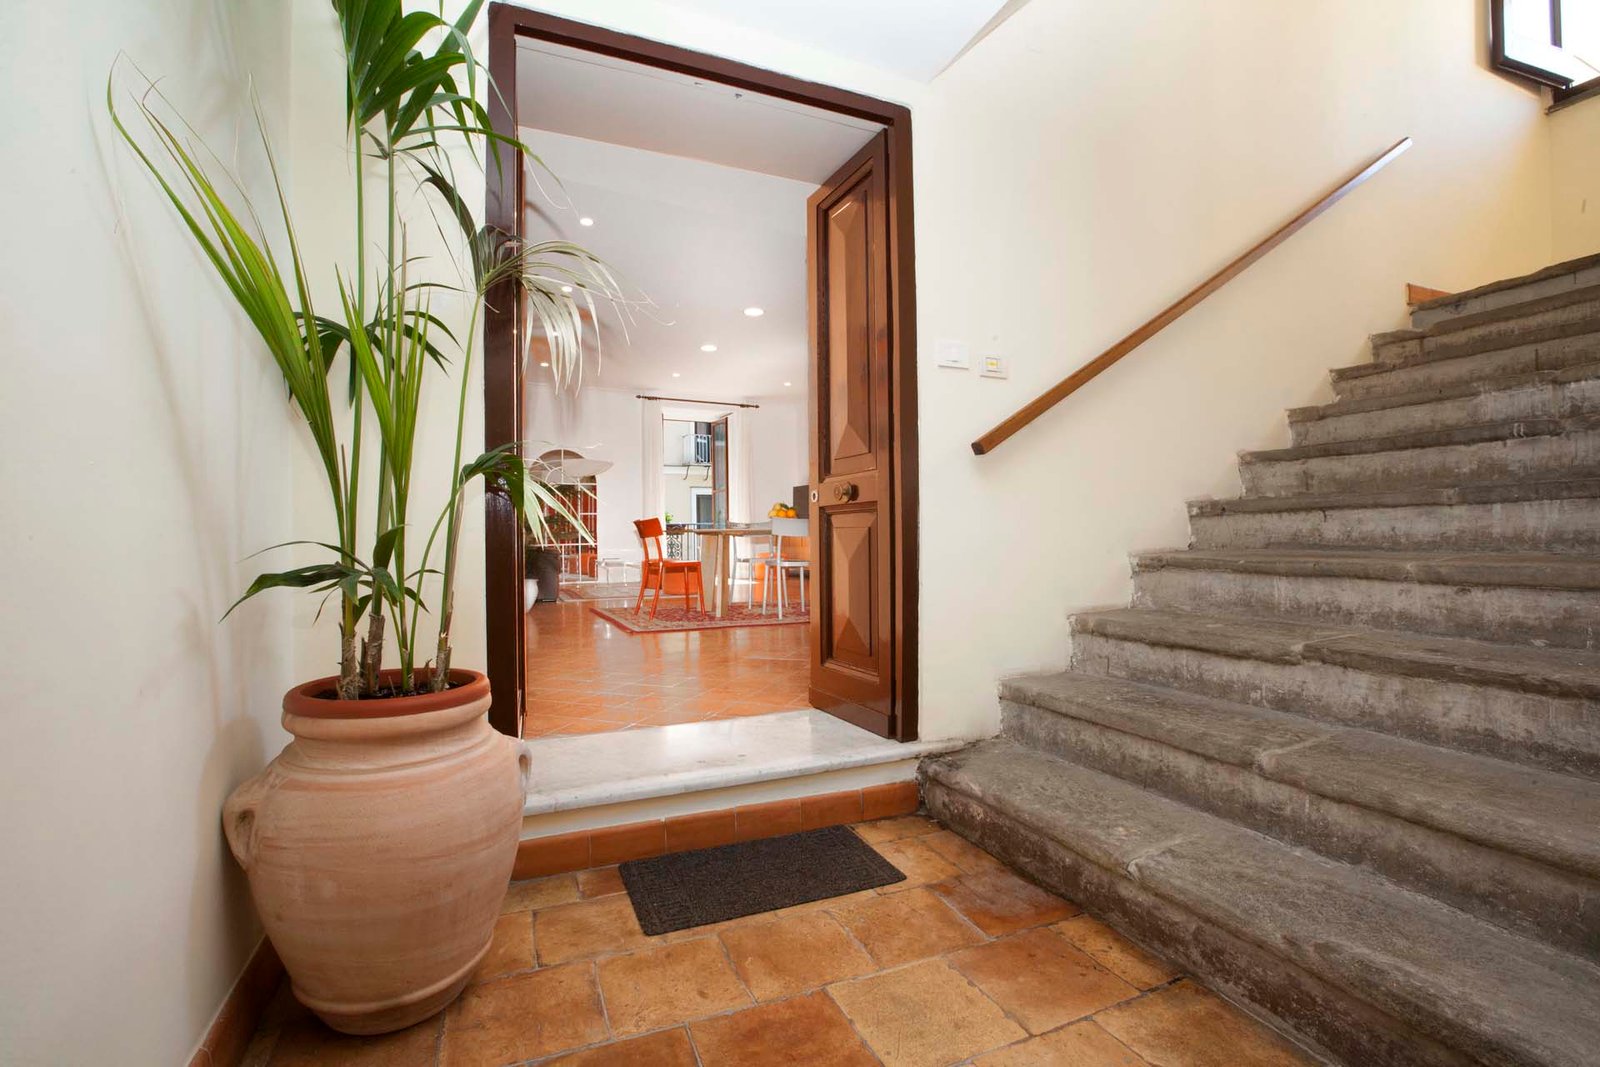 Deluxe Home in Sorrento Old Town